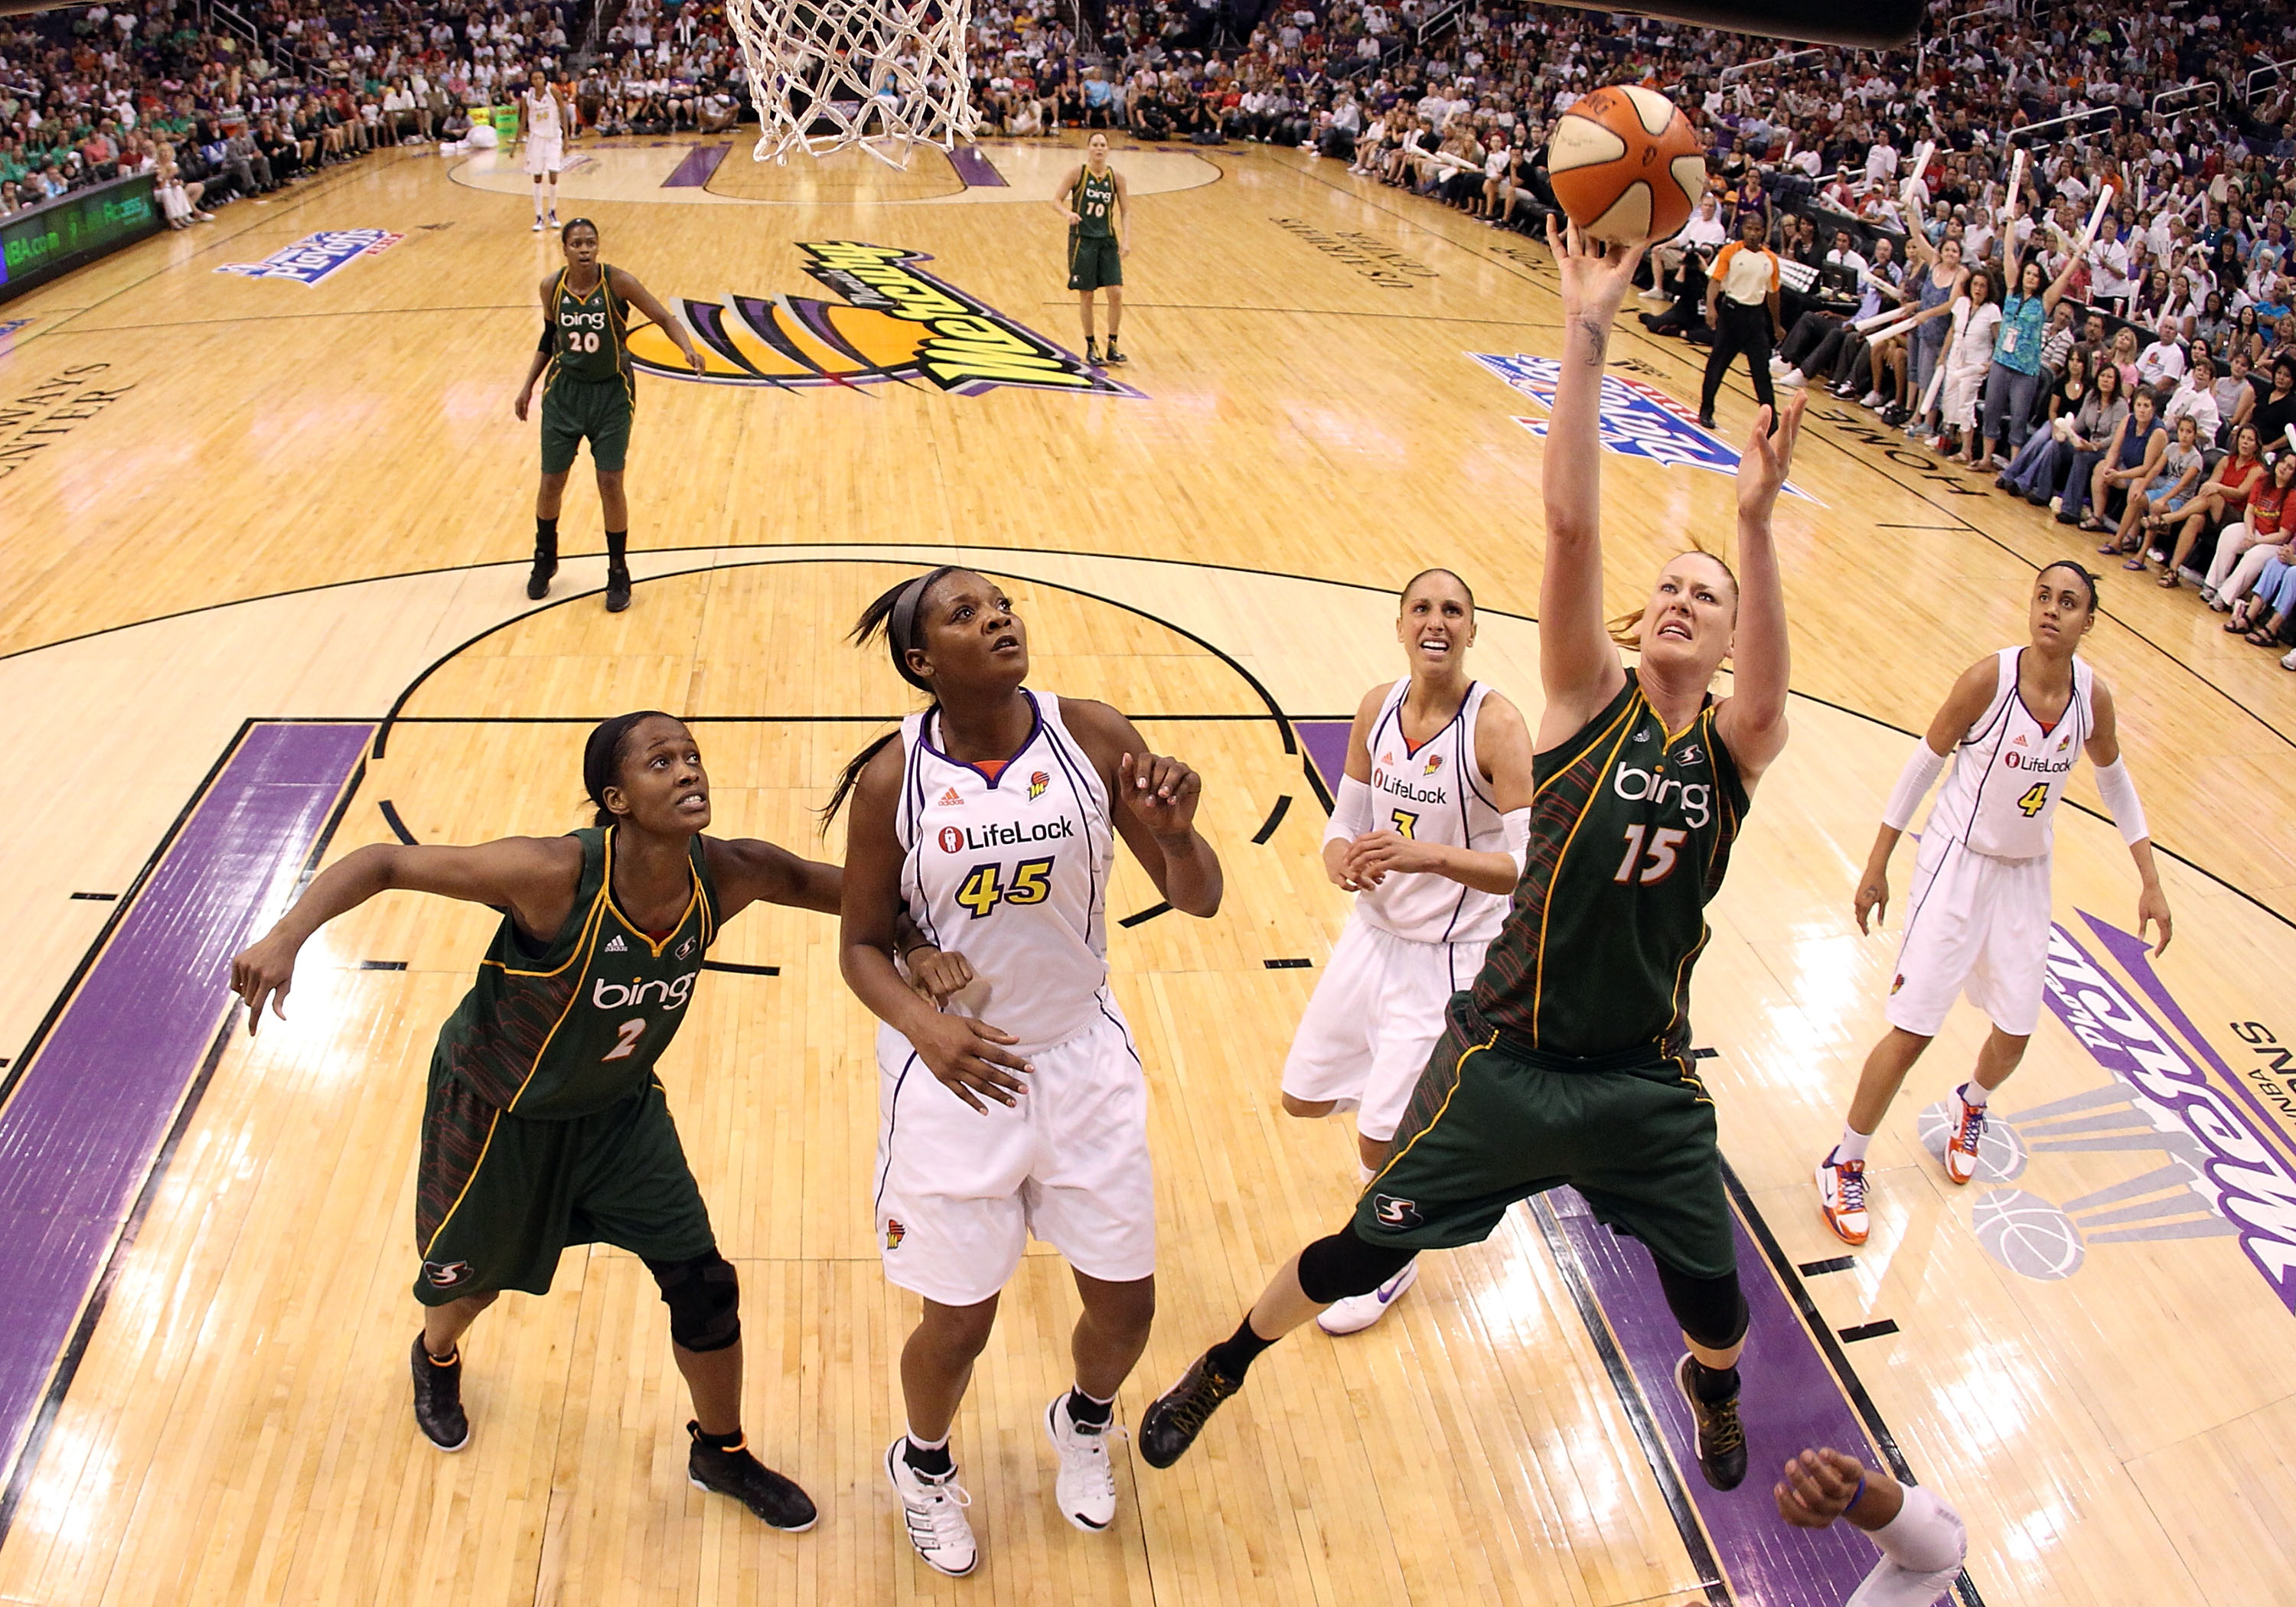 PHOENIX - SEPTEMBER 05:  Lauren Jackson #!5 of the Seattle Storm puts up a shot over Kara Braxton #45 of the Phoenix Mercury in Game Two of the Western Conference Finals during the 2010 WNBA Playoffs at US Airways Center on September 5, 2010 in Phoenix, A